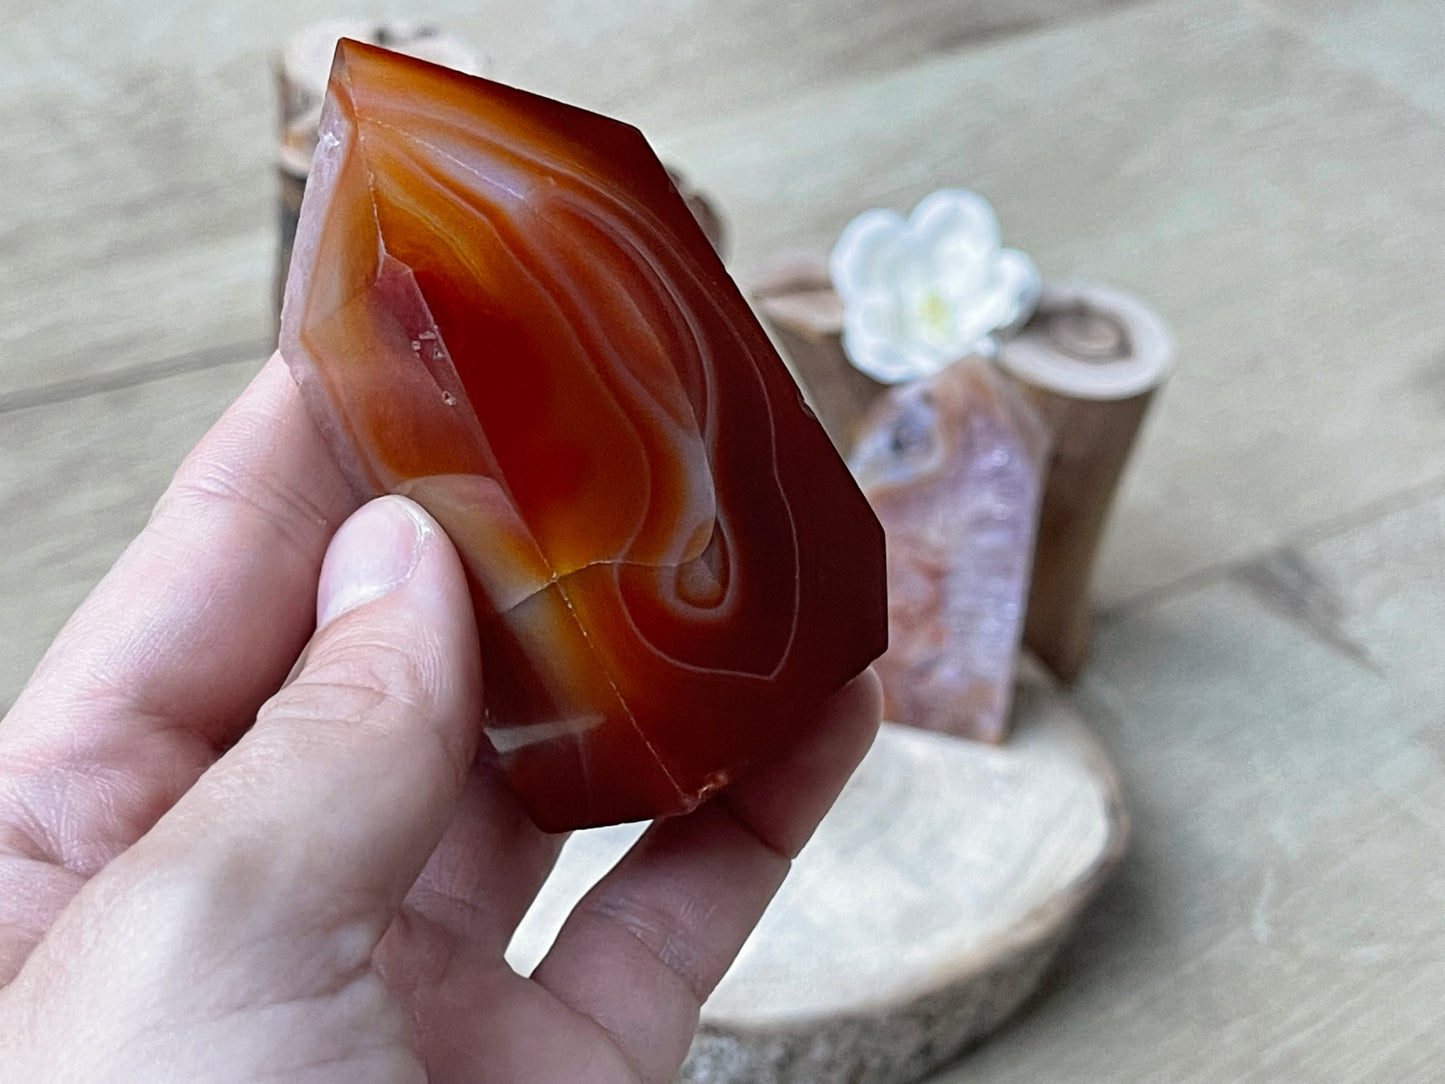 Carnelian tower with amethyst inclusion